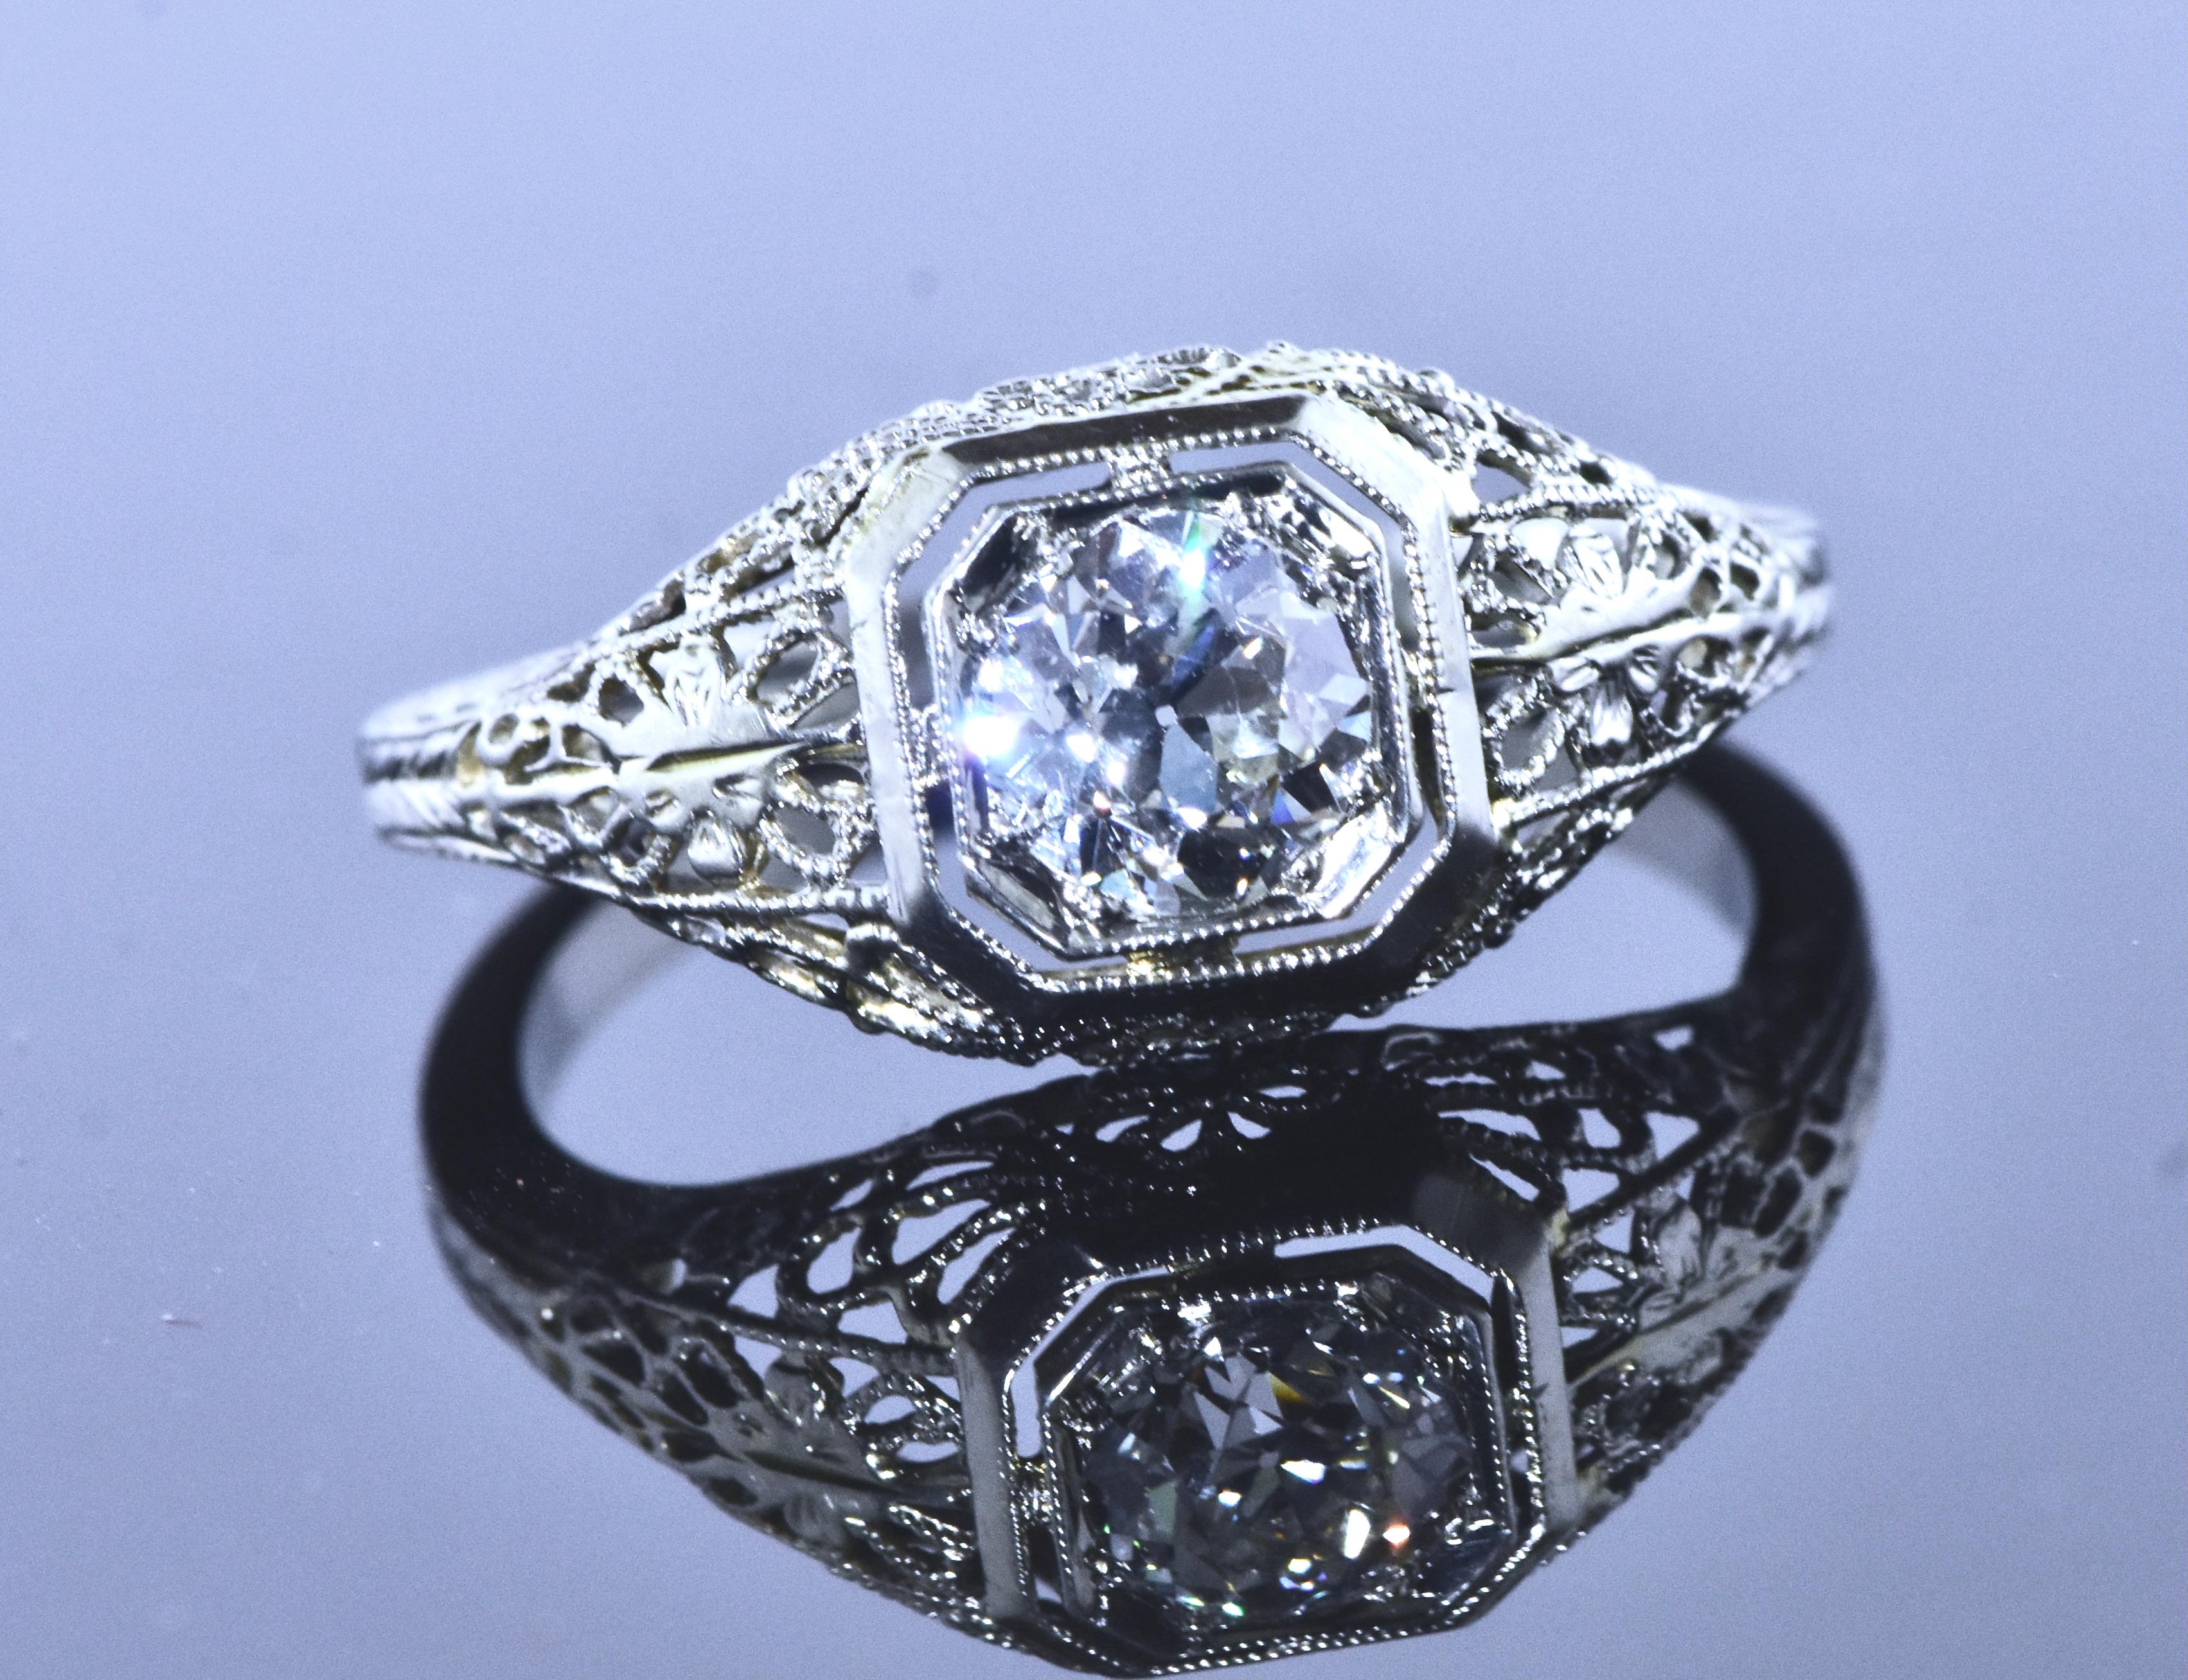 Antique Filigree Ring Fine .65 Ct. Diamond and 18K White Gold, American, c. 1920 For Sale 4